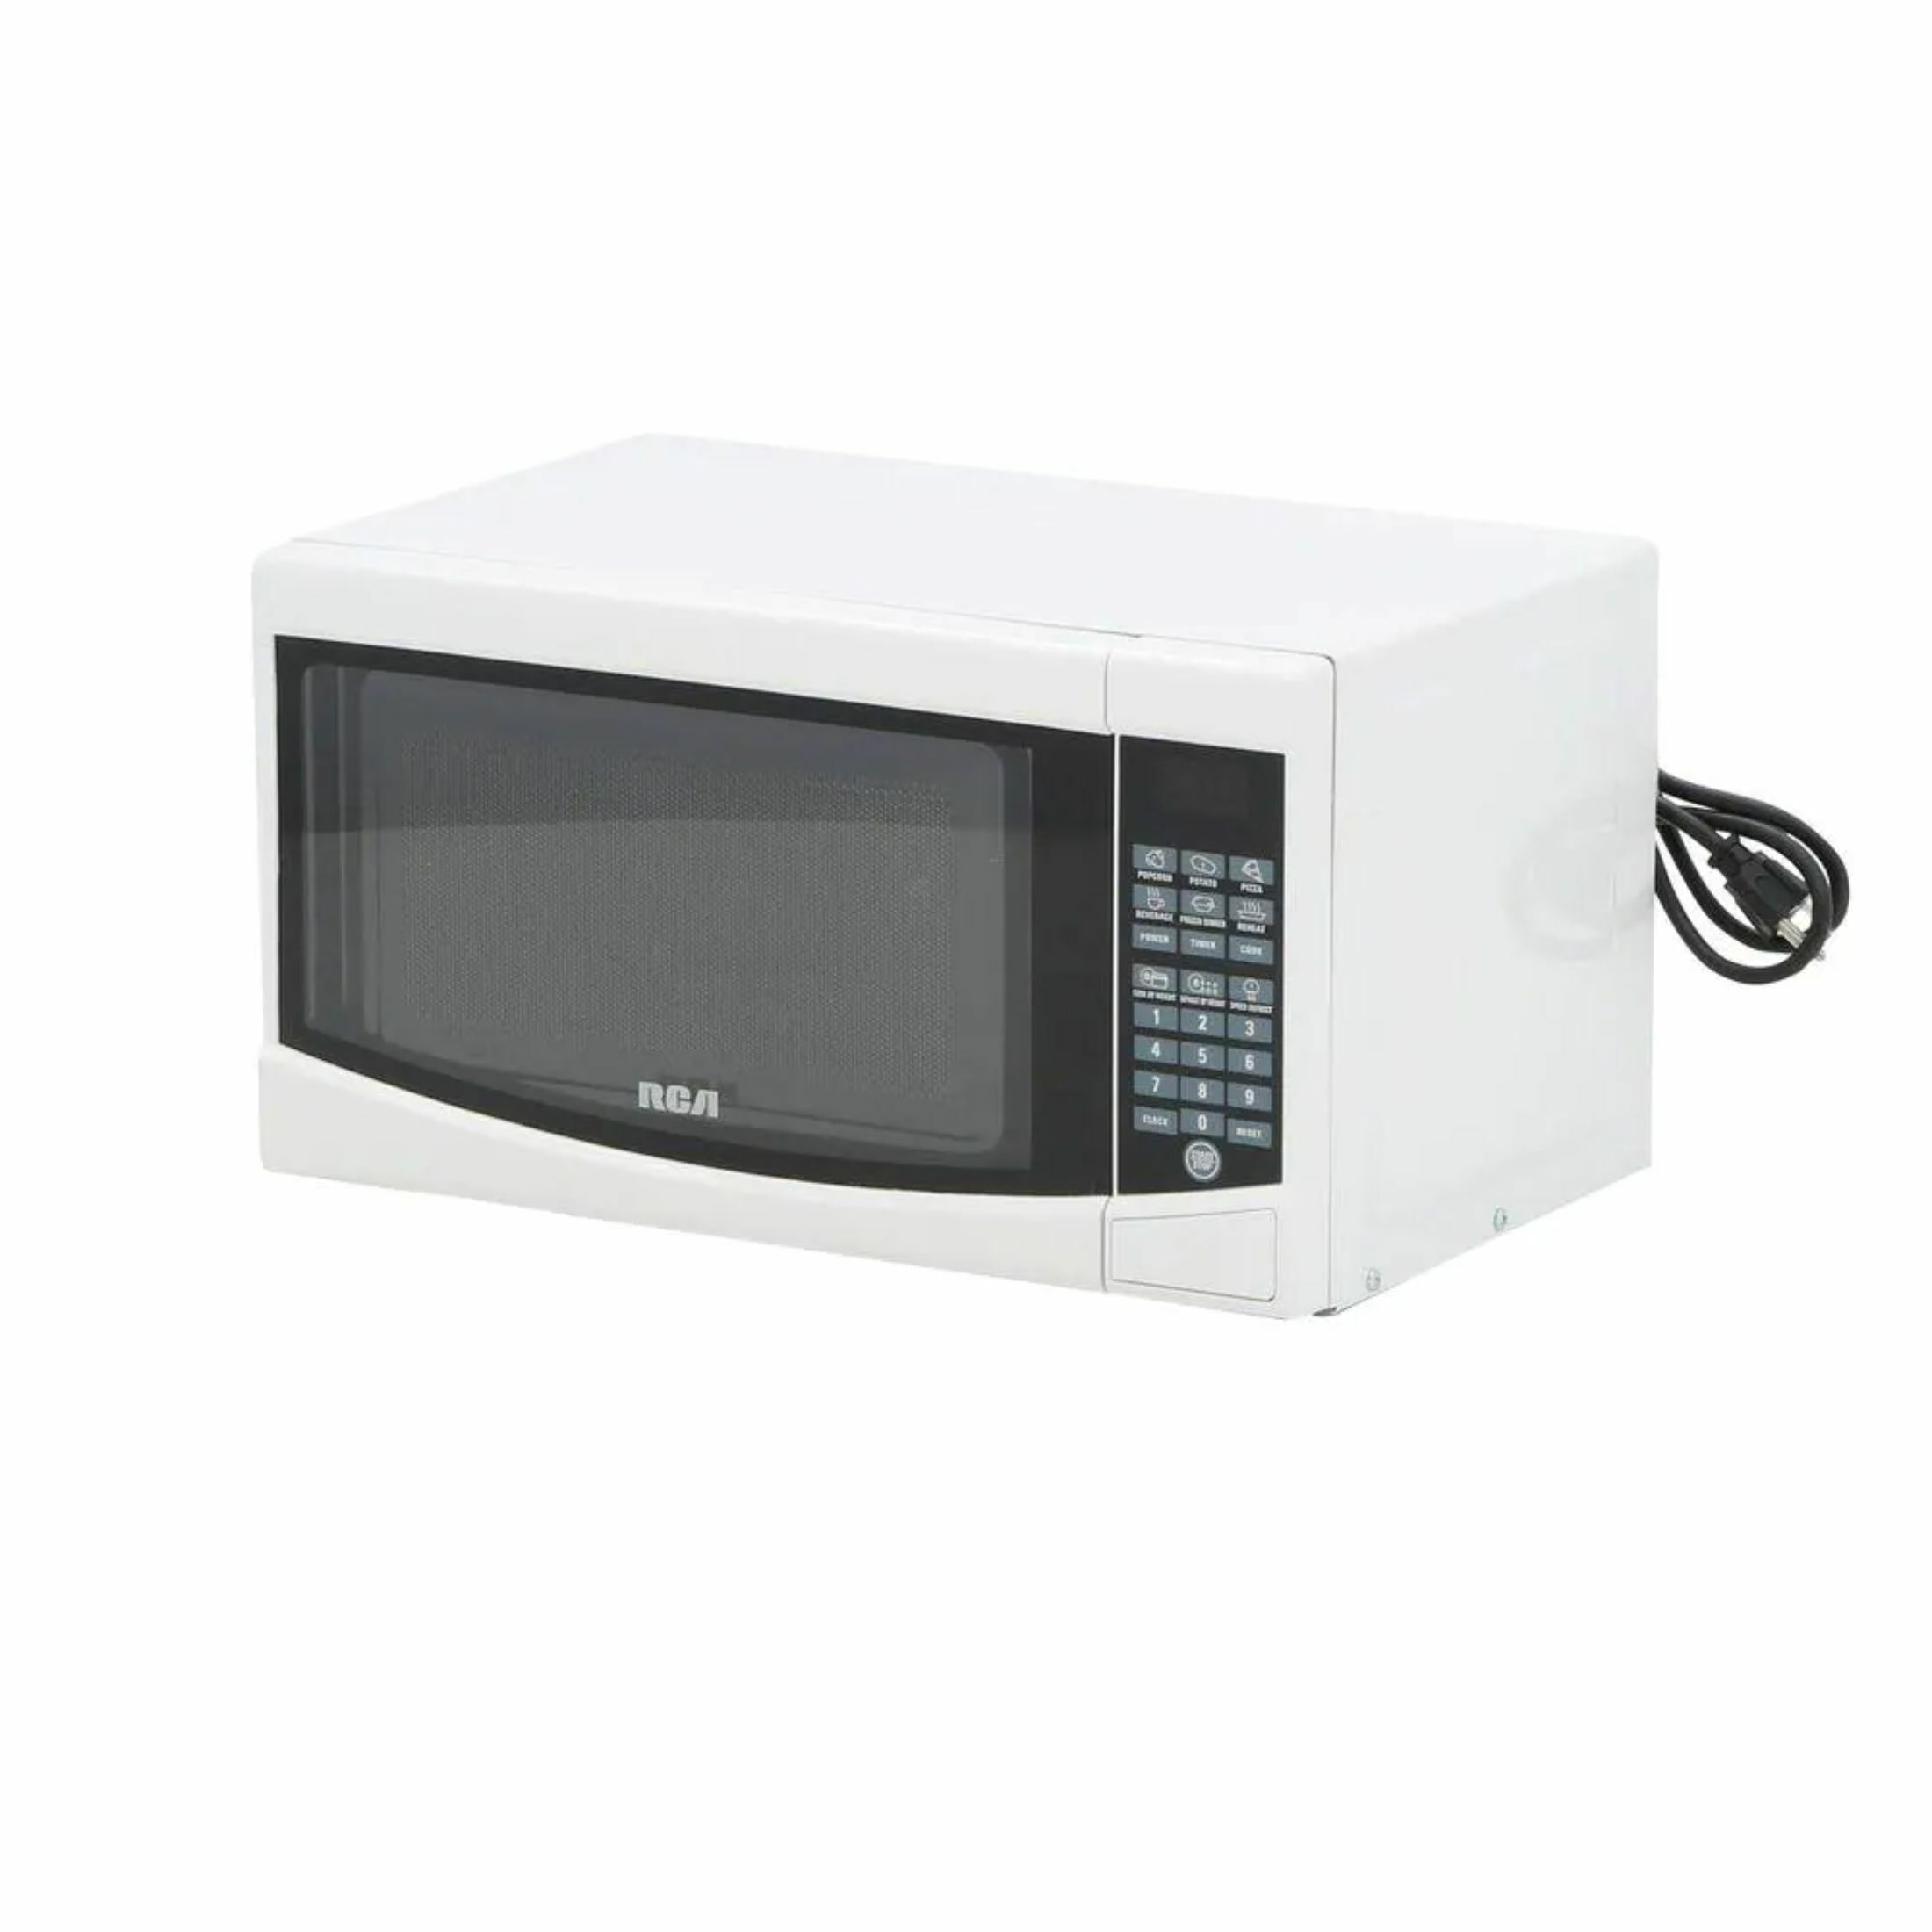 RCA New 0.7 Cu. ft. Countertop Microwave - White - image 5 of 5